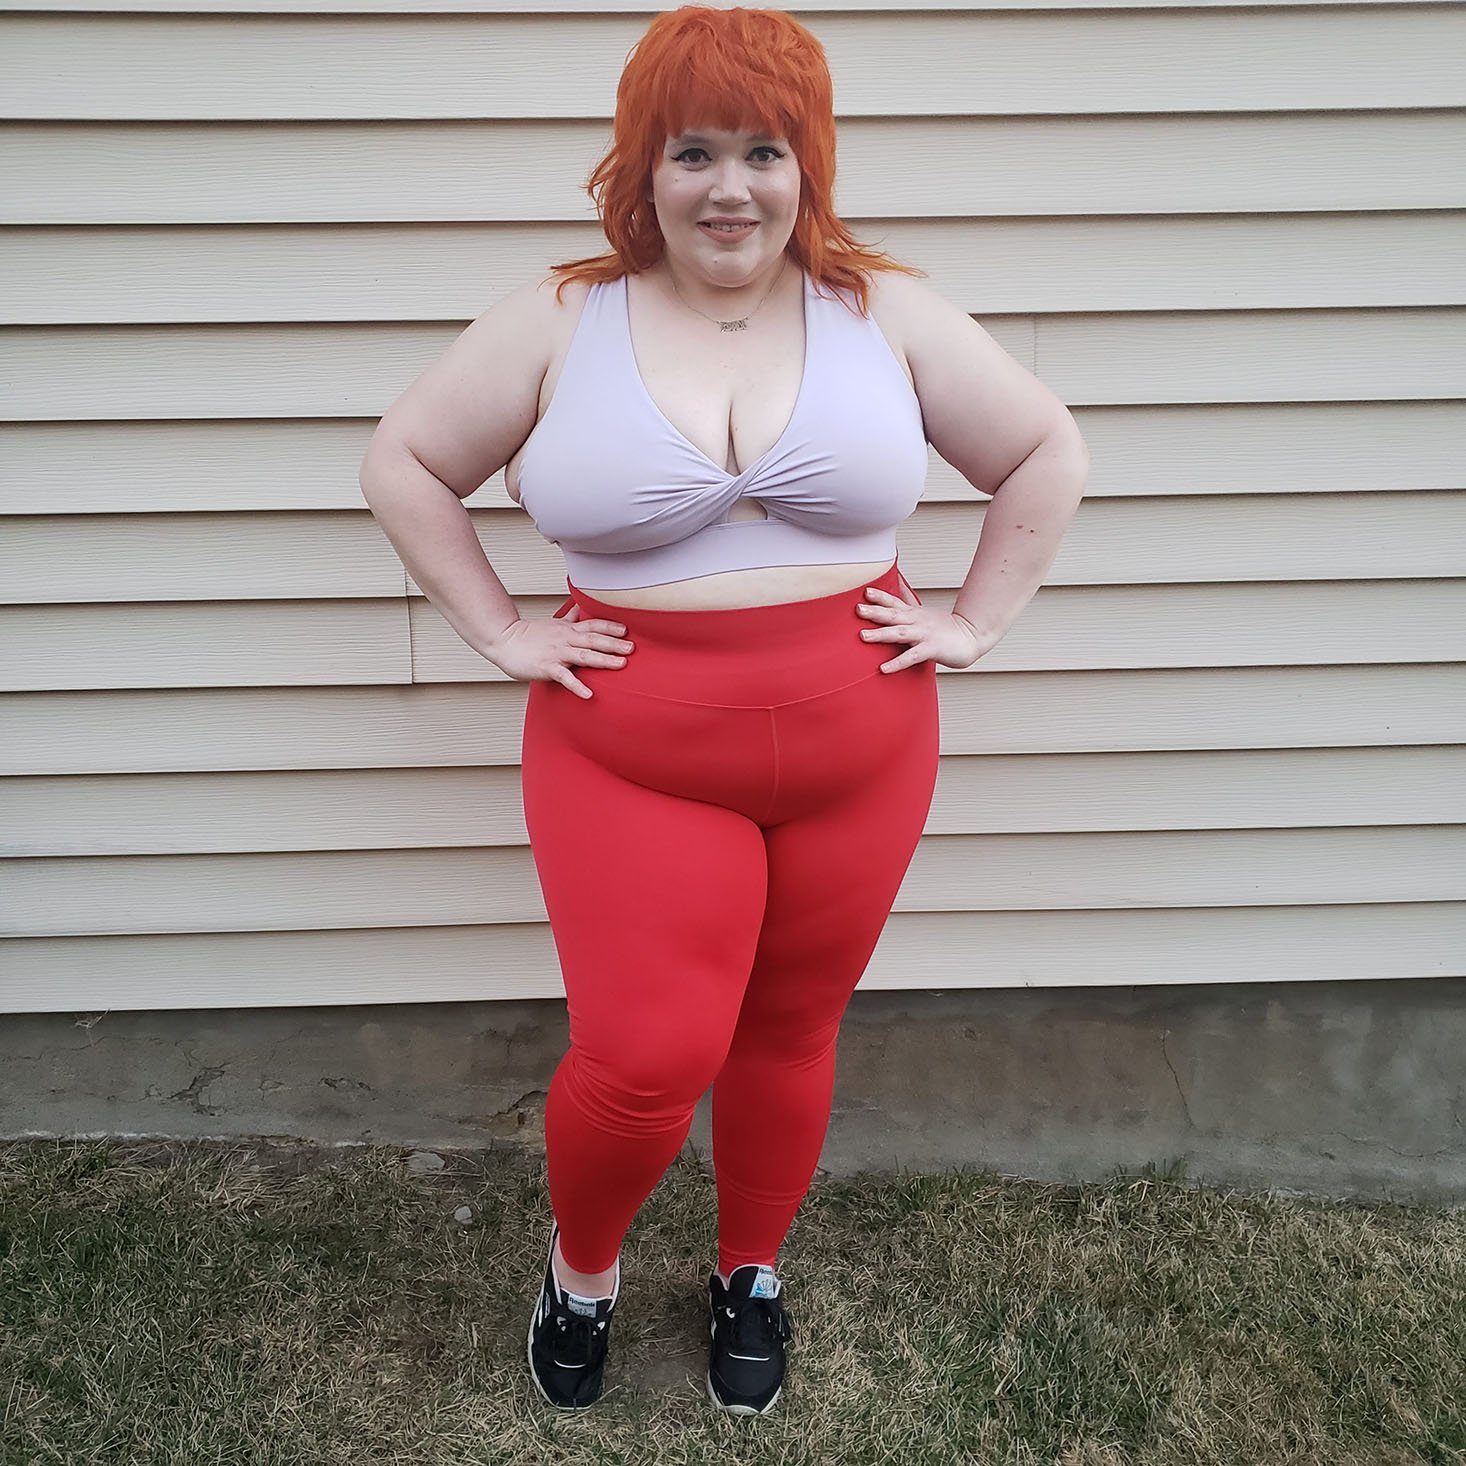 Fabletics VIP Plus Size Review + Coupon - Your Time To Shine